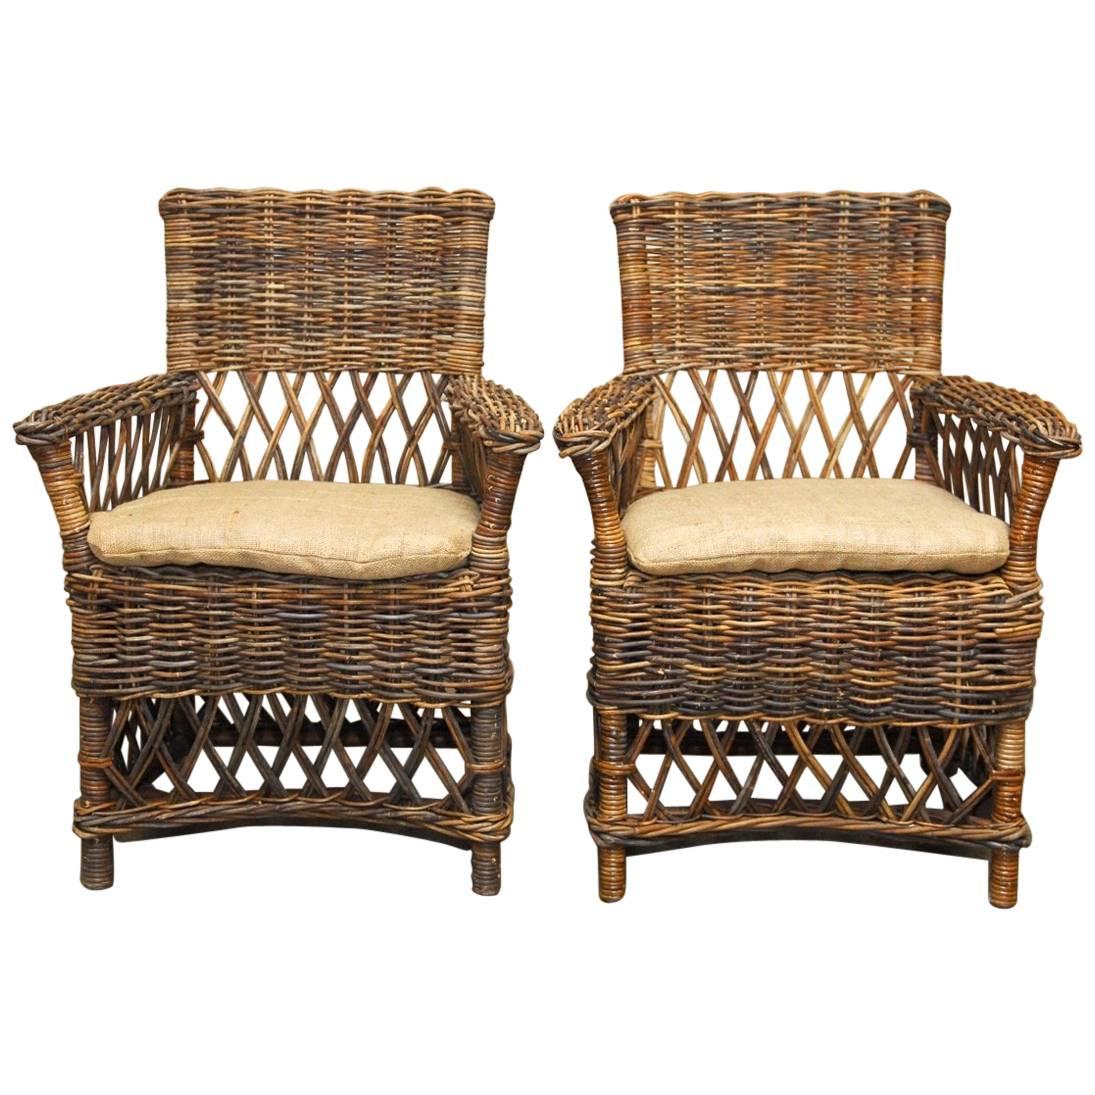 Pair of Organic Style Woven Stick Wicker Armchairs